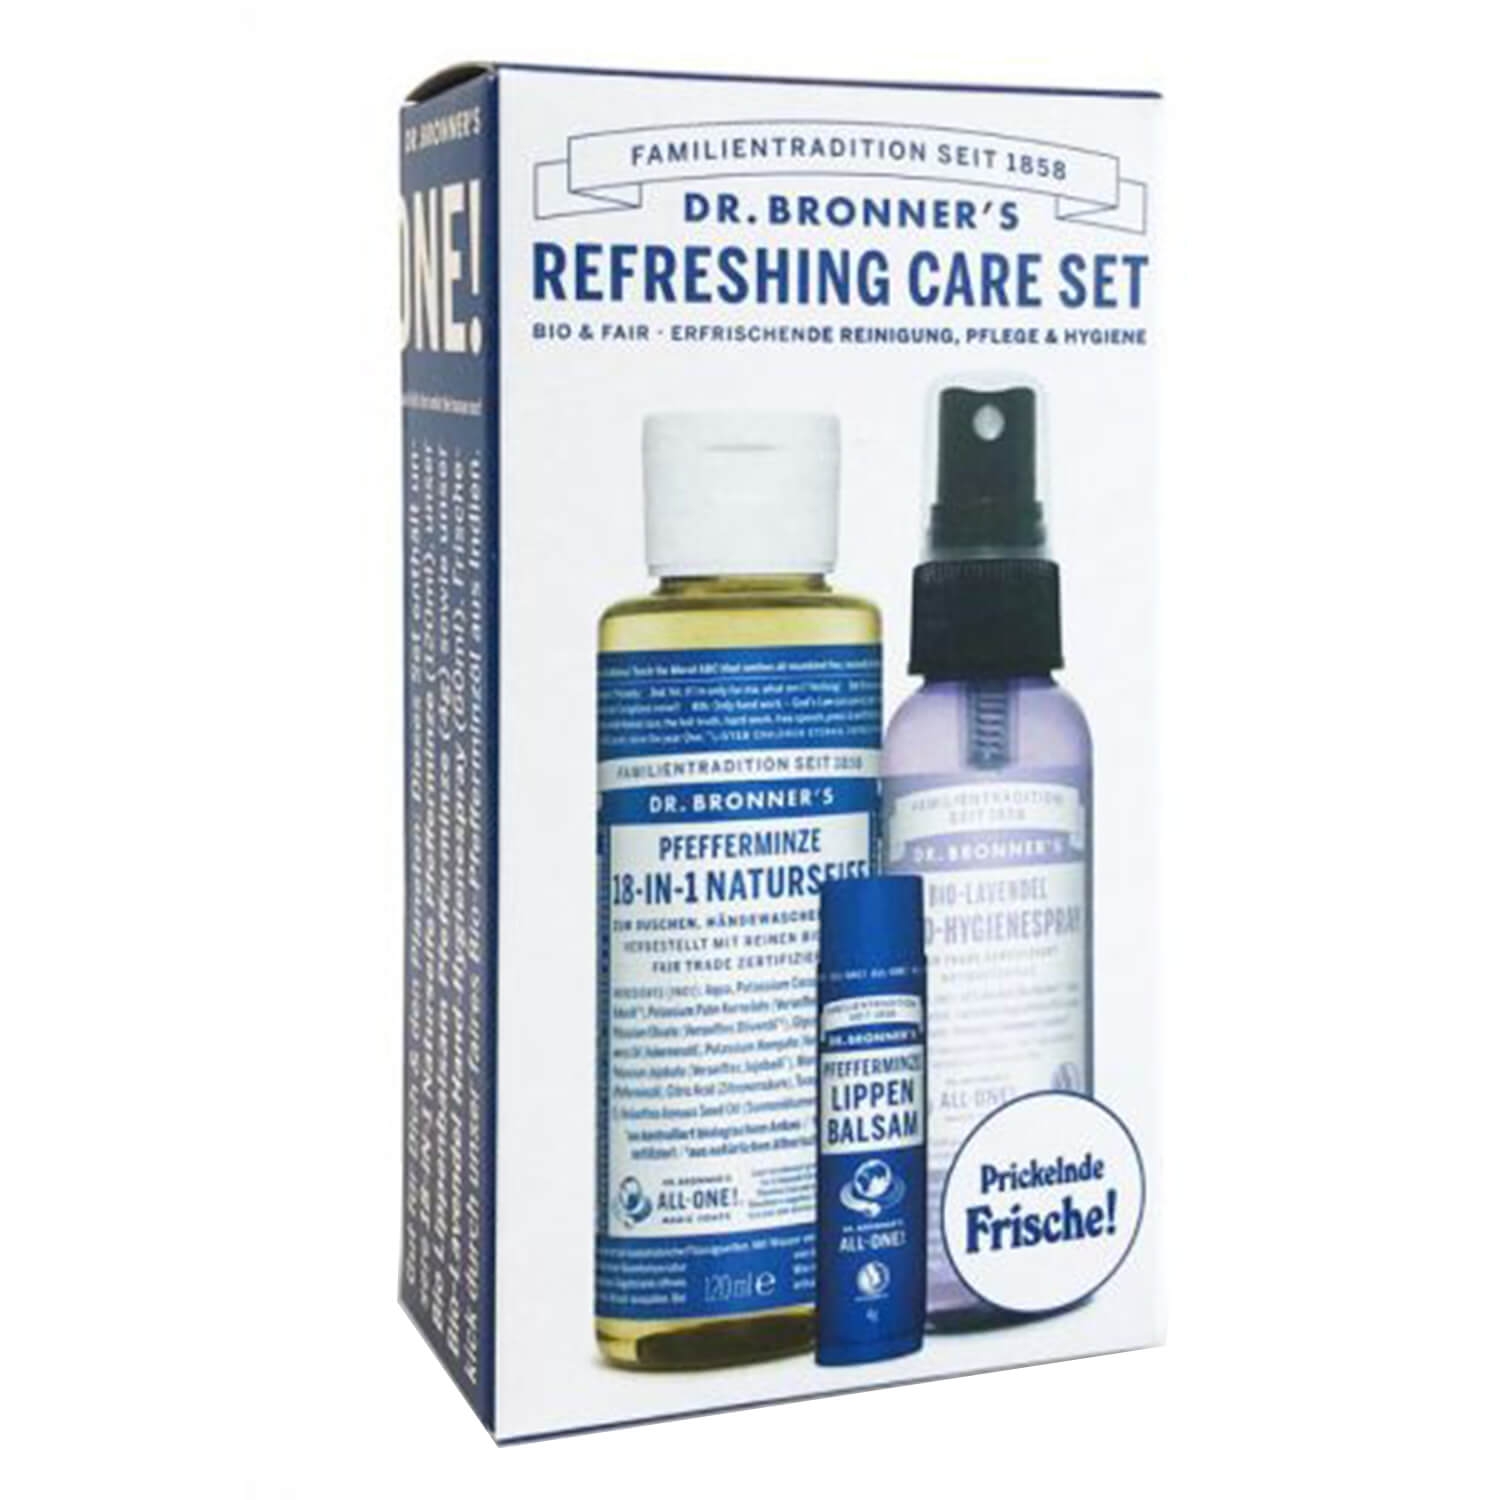 Product image from DR. BRONNER'S - Refreshing Care Set